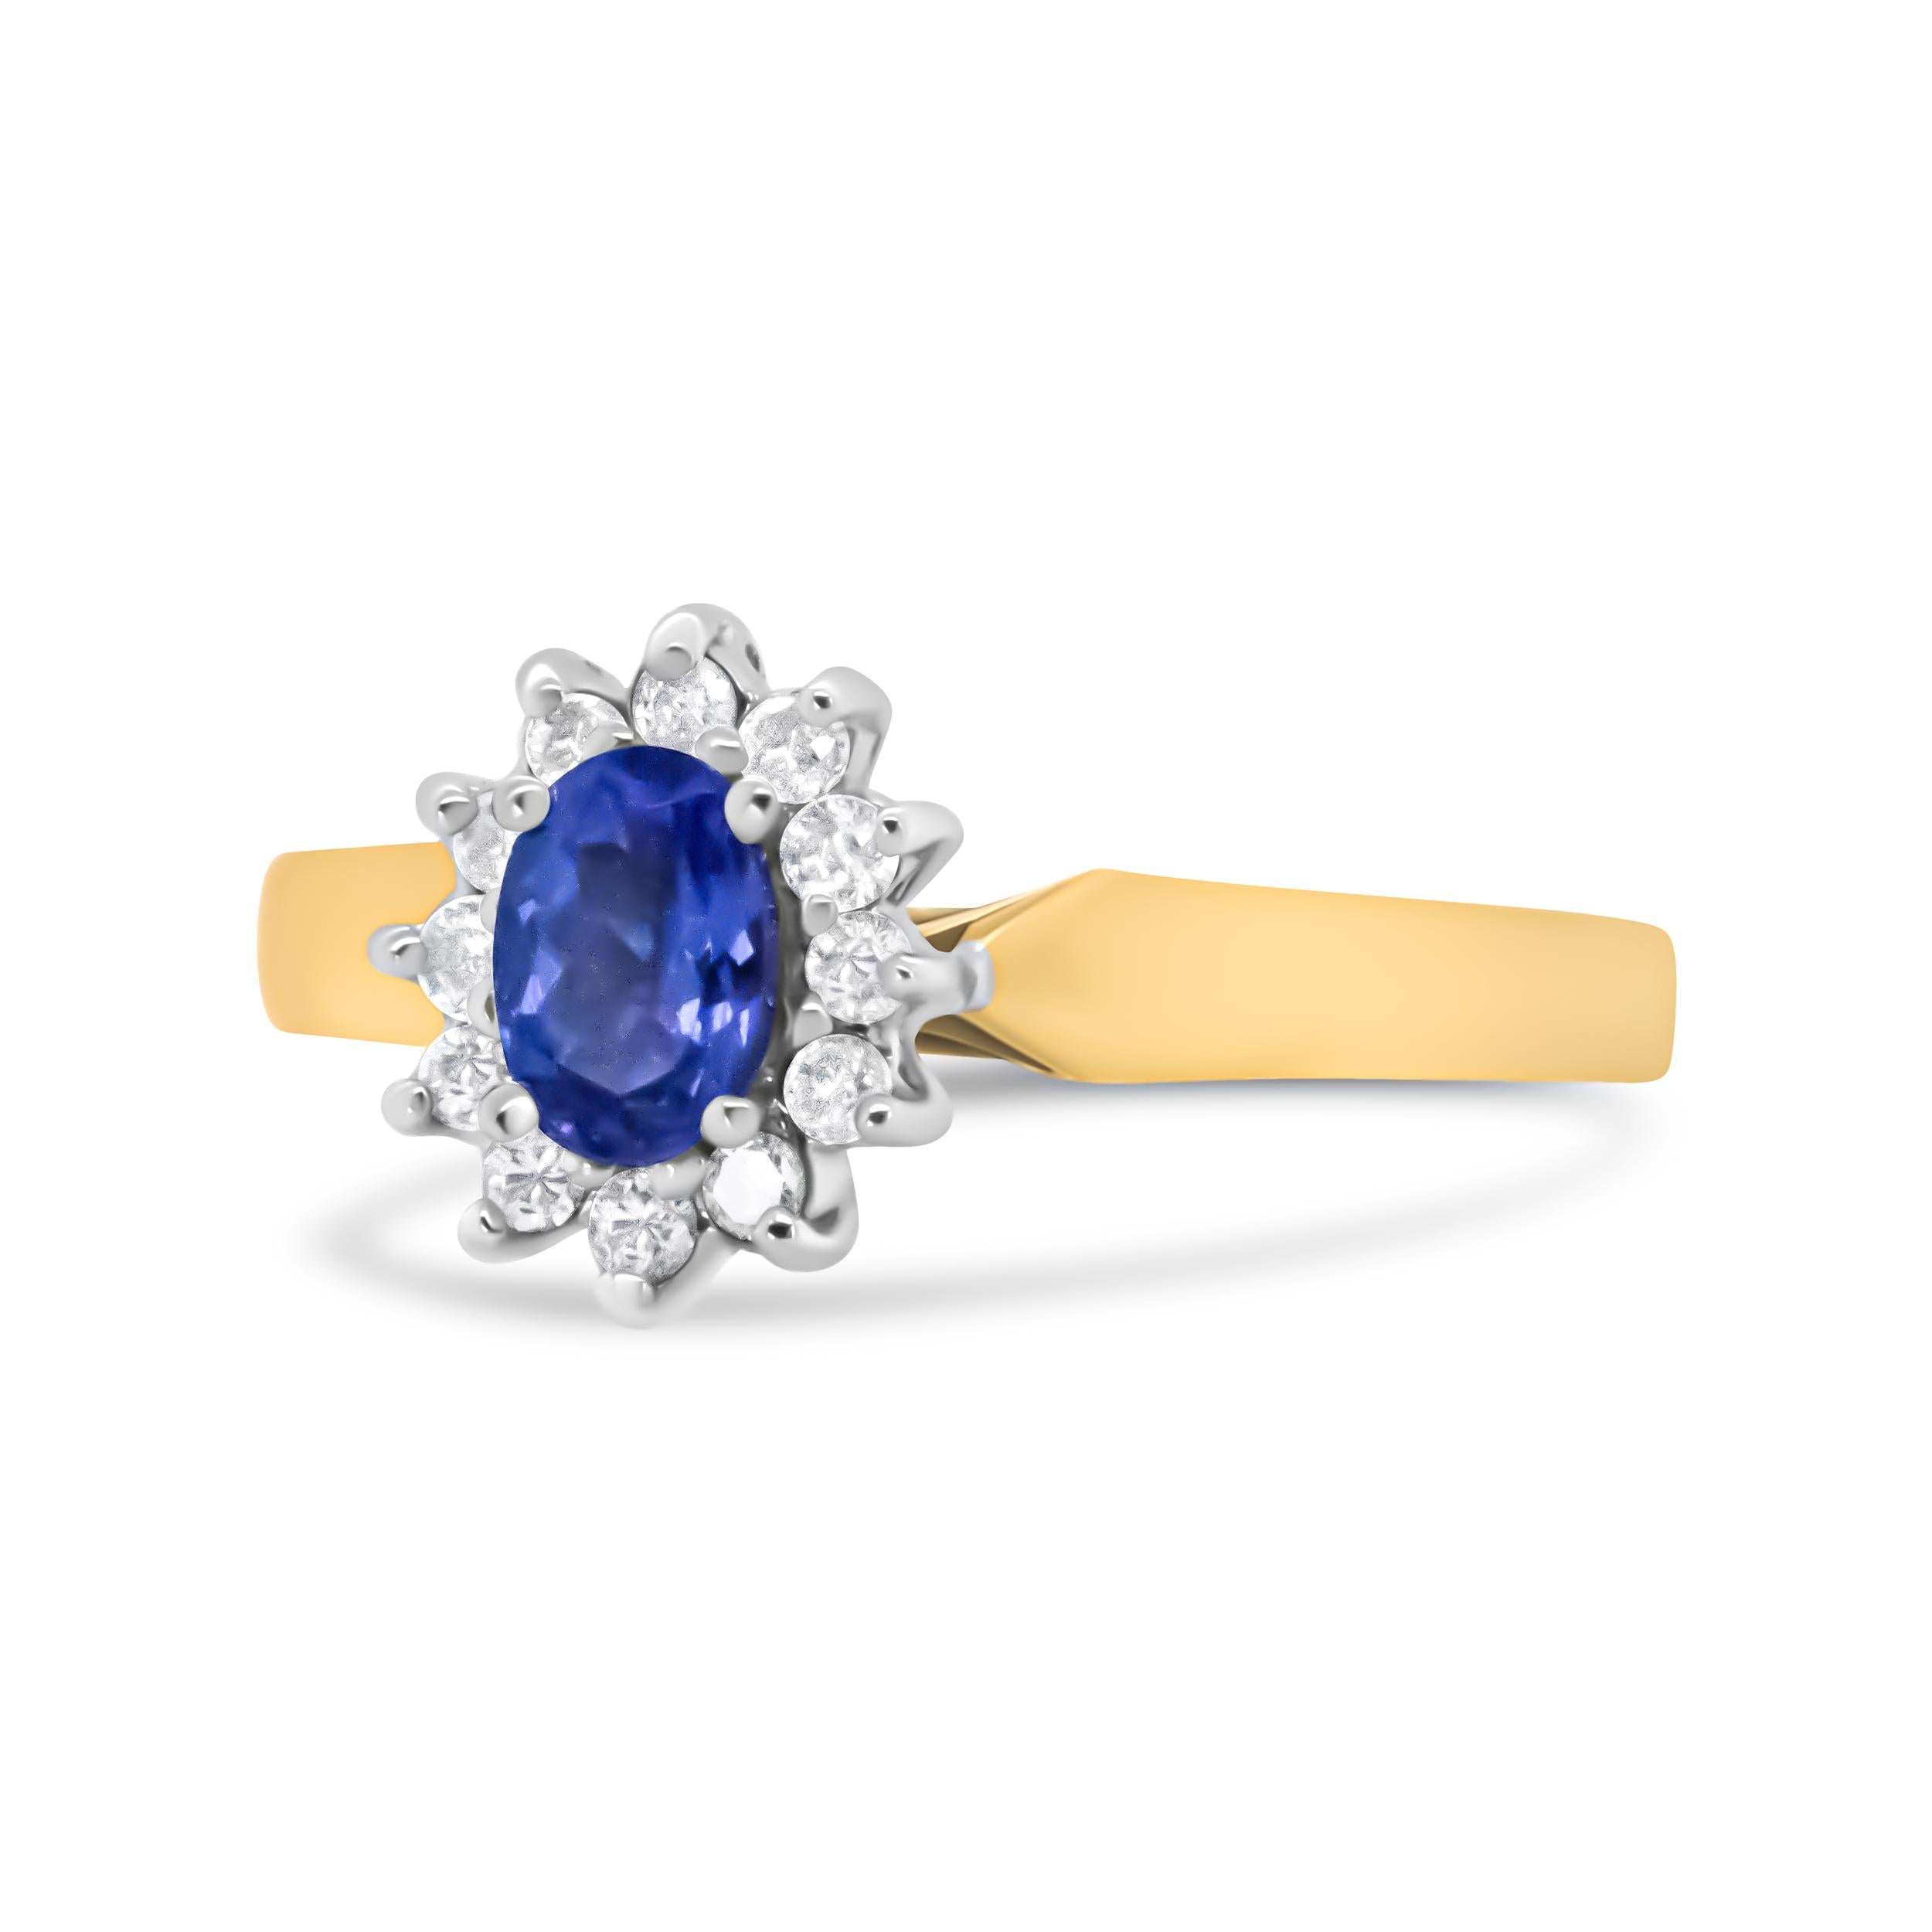 She will adore the color and shimmering splendor of this diamond and gemstone halo ring. Set at the center of this ring is a brilliant cut, oval blue tanzanite gemstone. A glimmering halo of round white diamonds sparkle wondrously from their prong